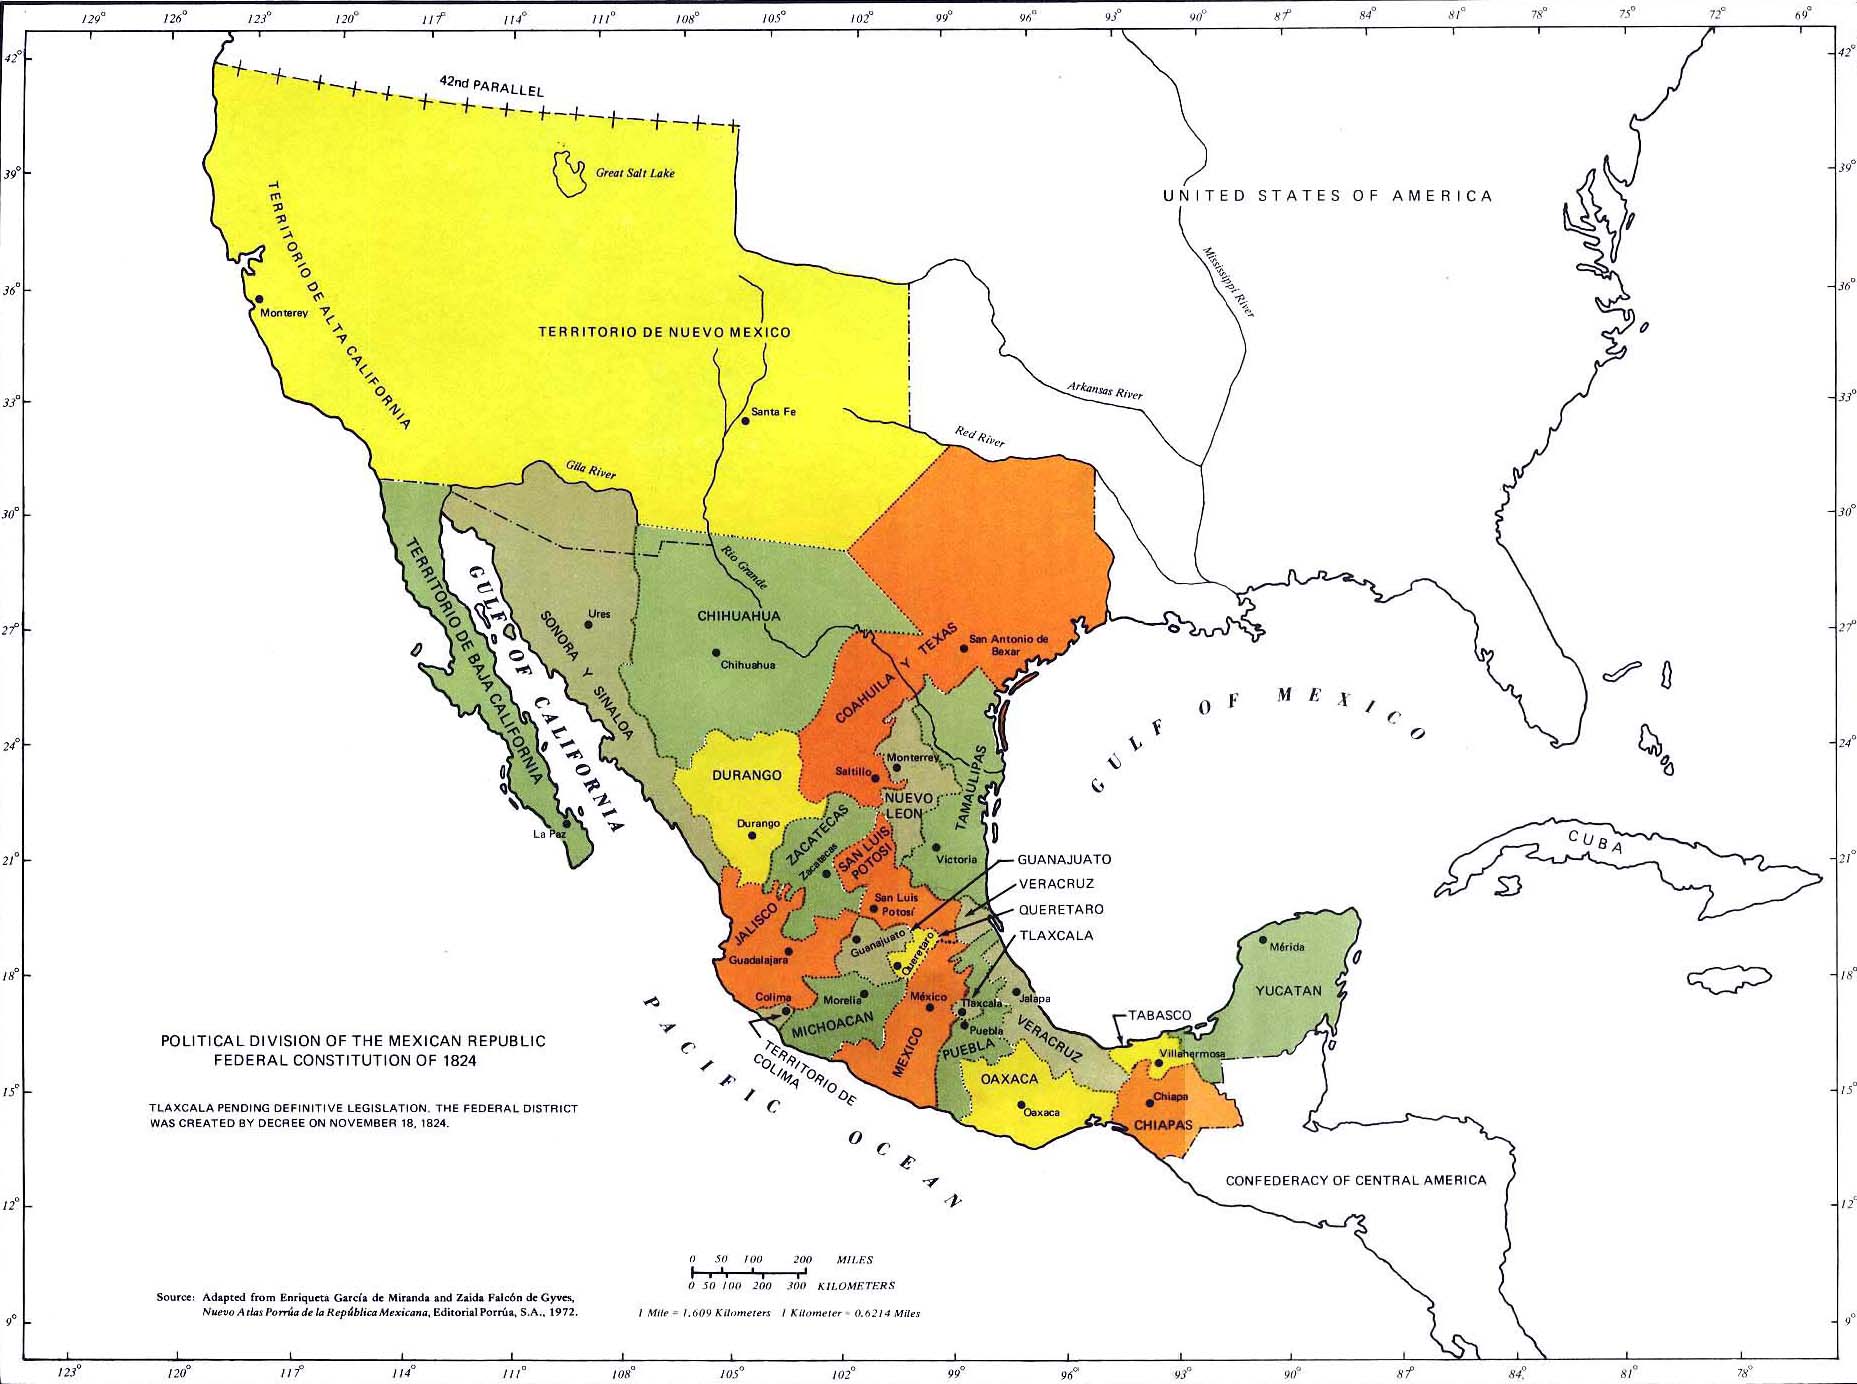 Map of Mexico in 1824